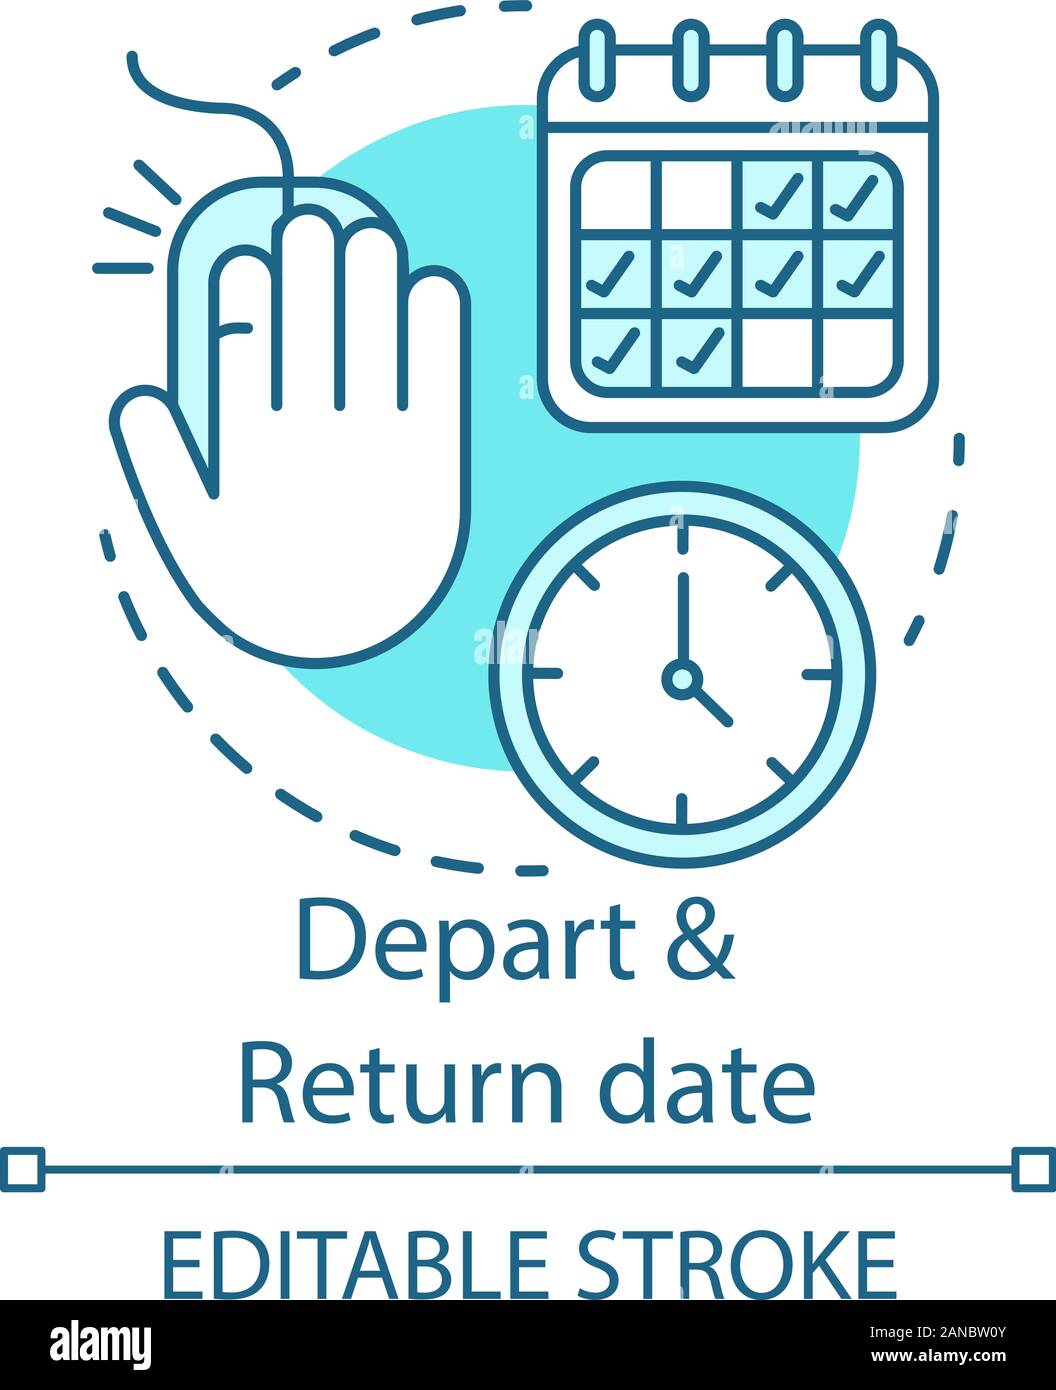 Depart and return date concept icon. Travel insurance idea thin line illustration. Flights schedules and timetables. Air travel, trip by plane. Vector Stock Vector